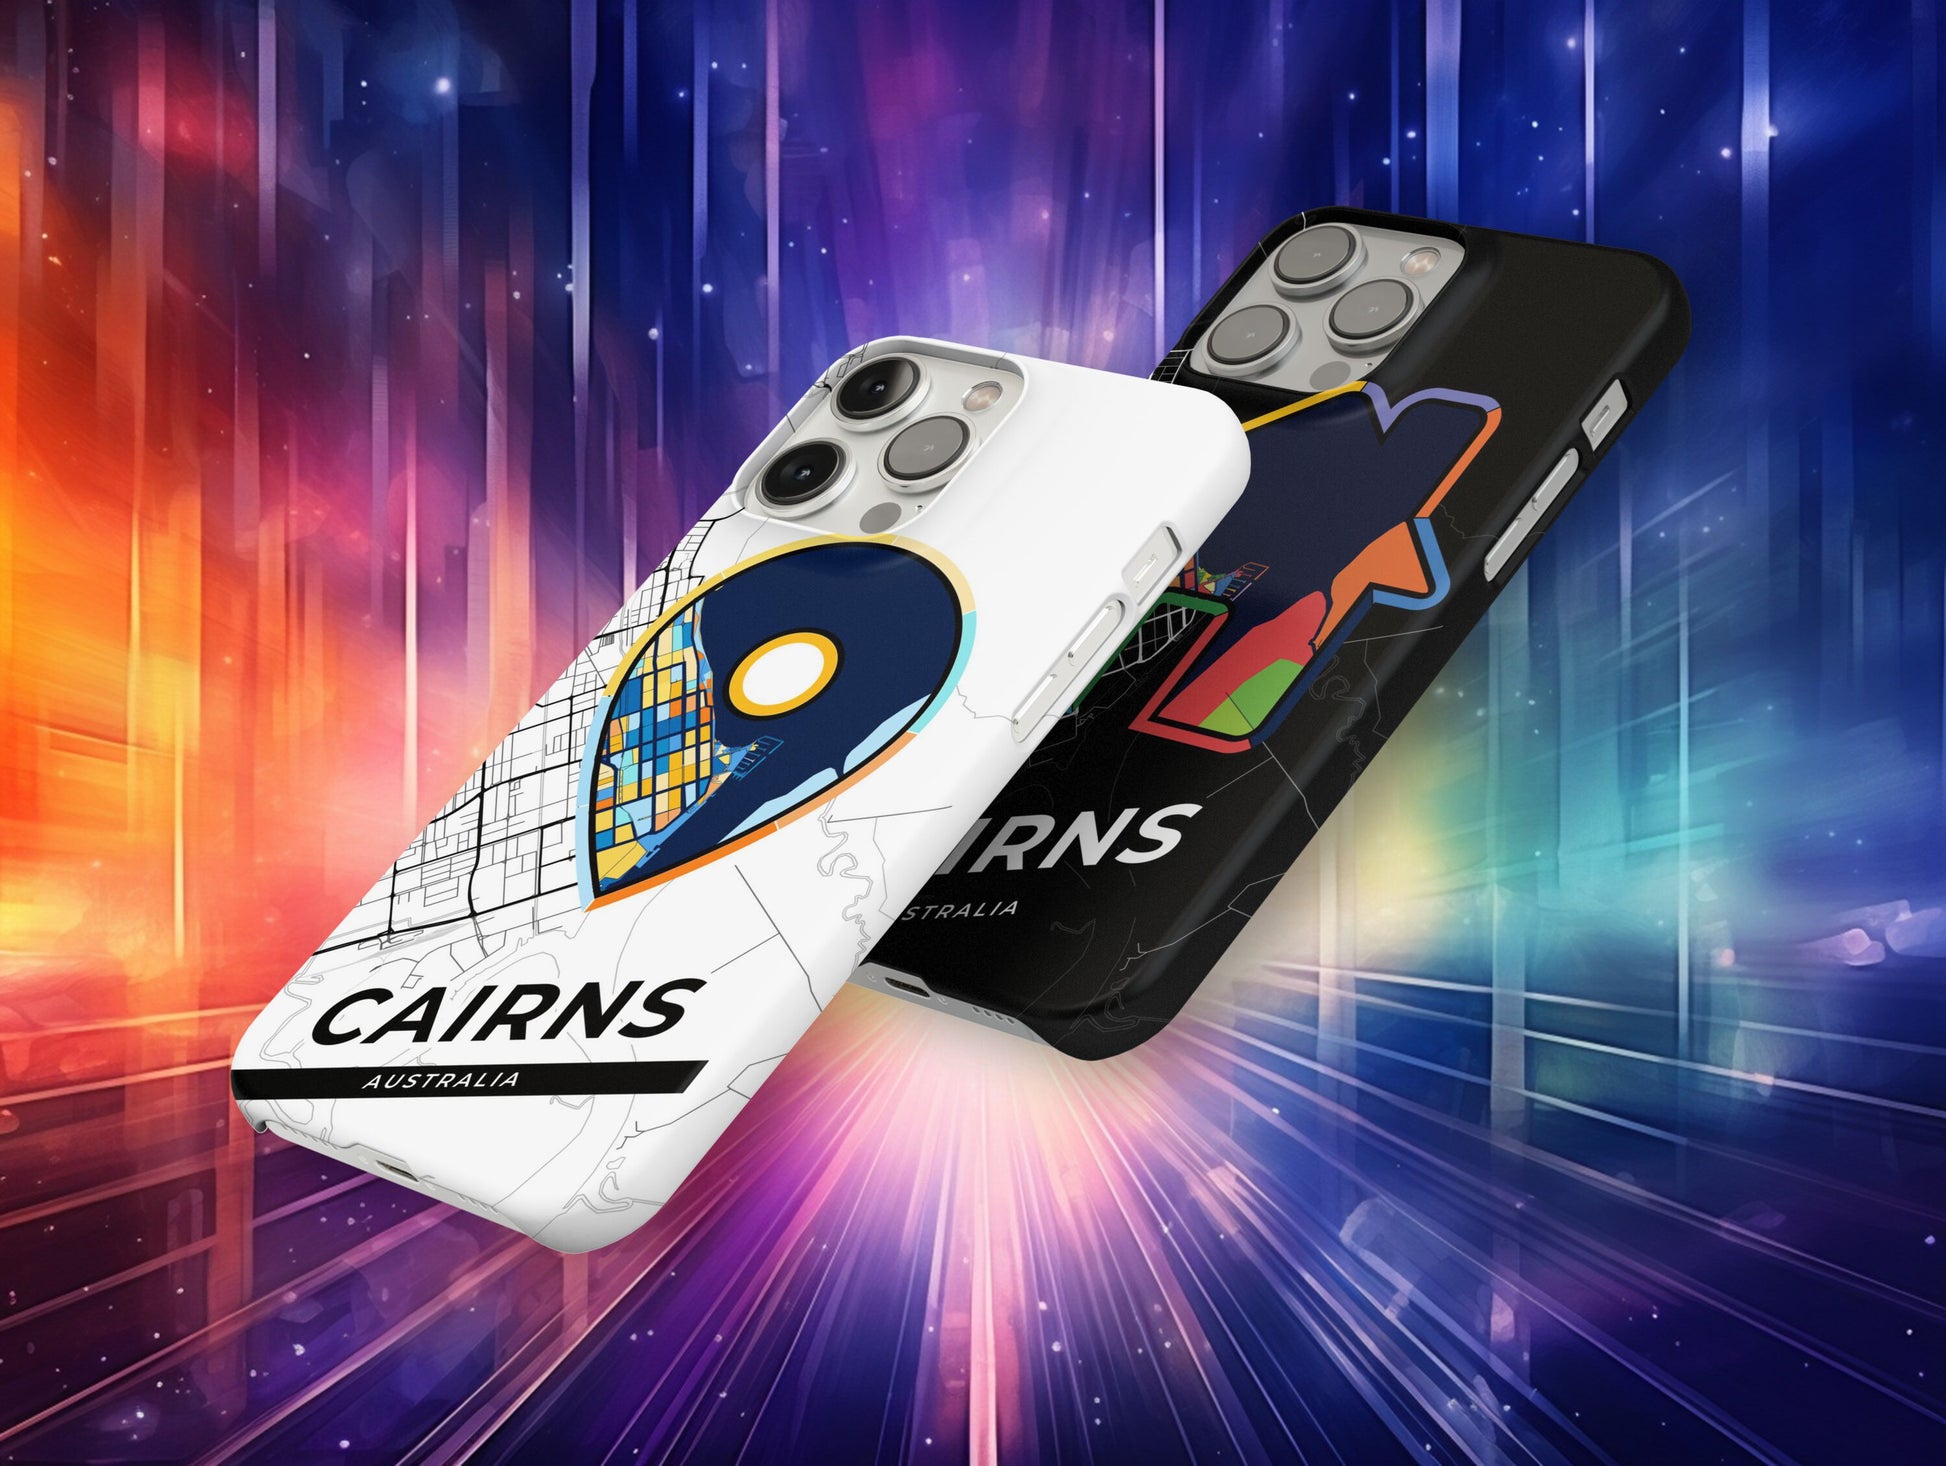 Cairns Australia slim phone case with colorful icon. Birthday, wedding or housewarming gift. Couple match cases.